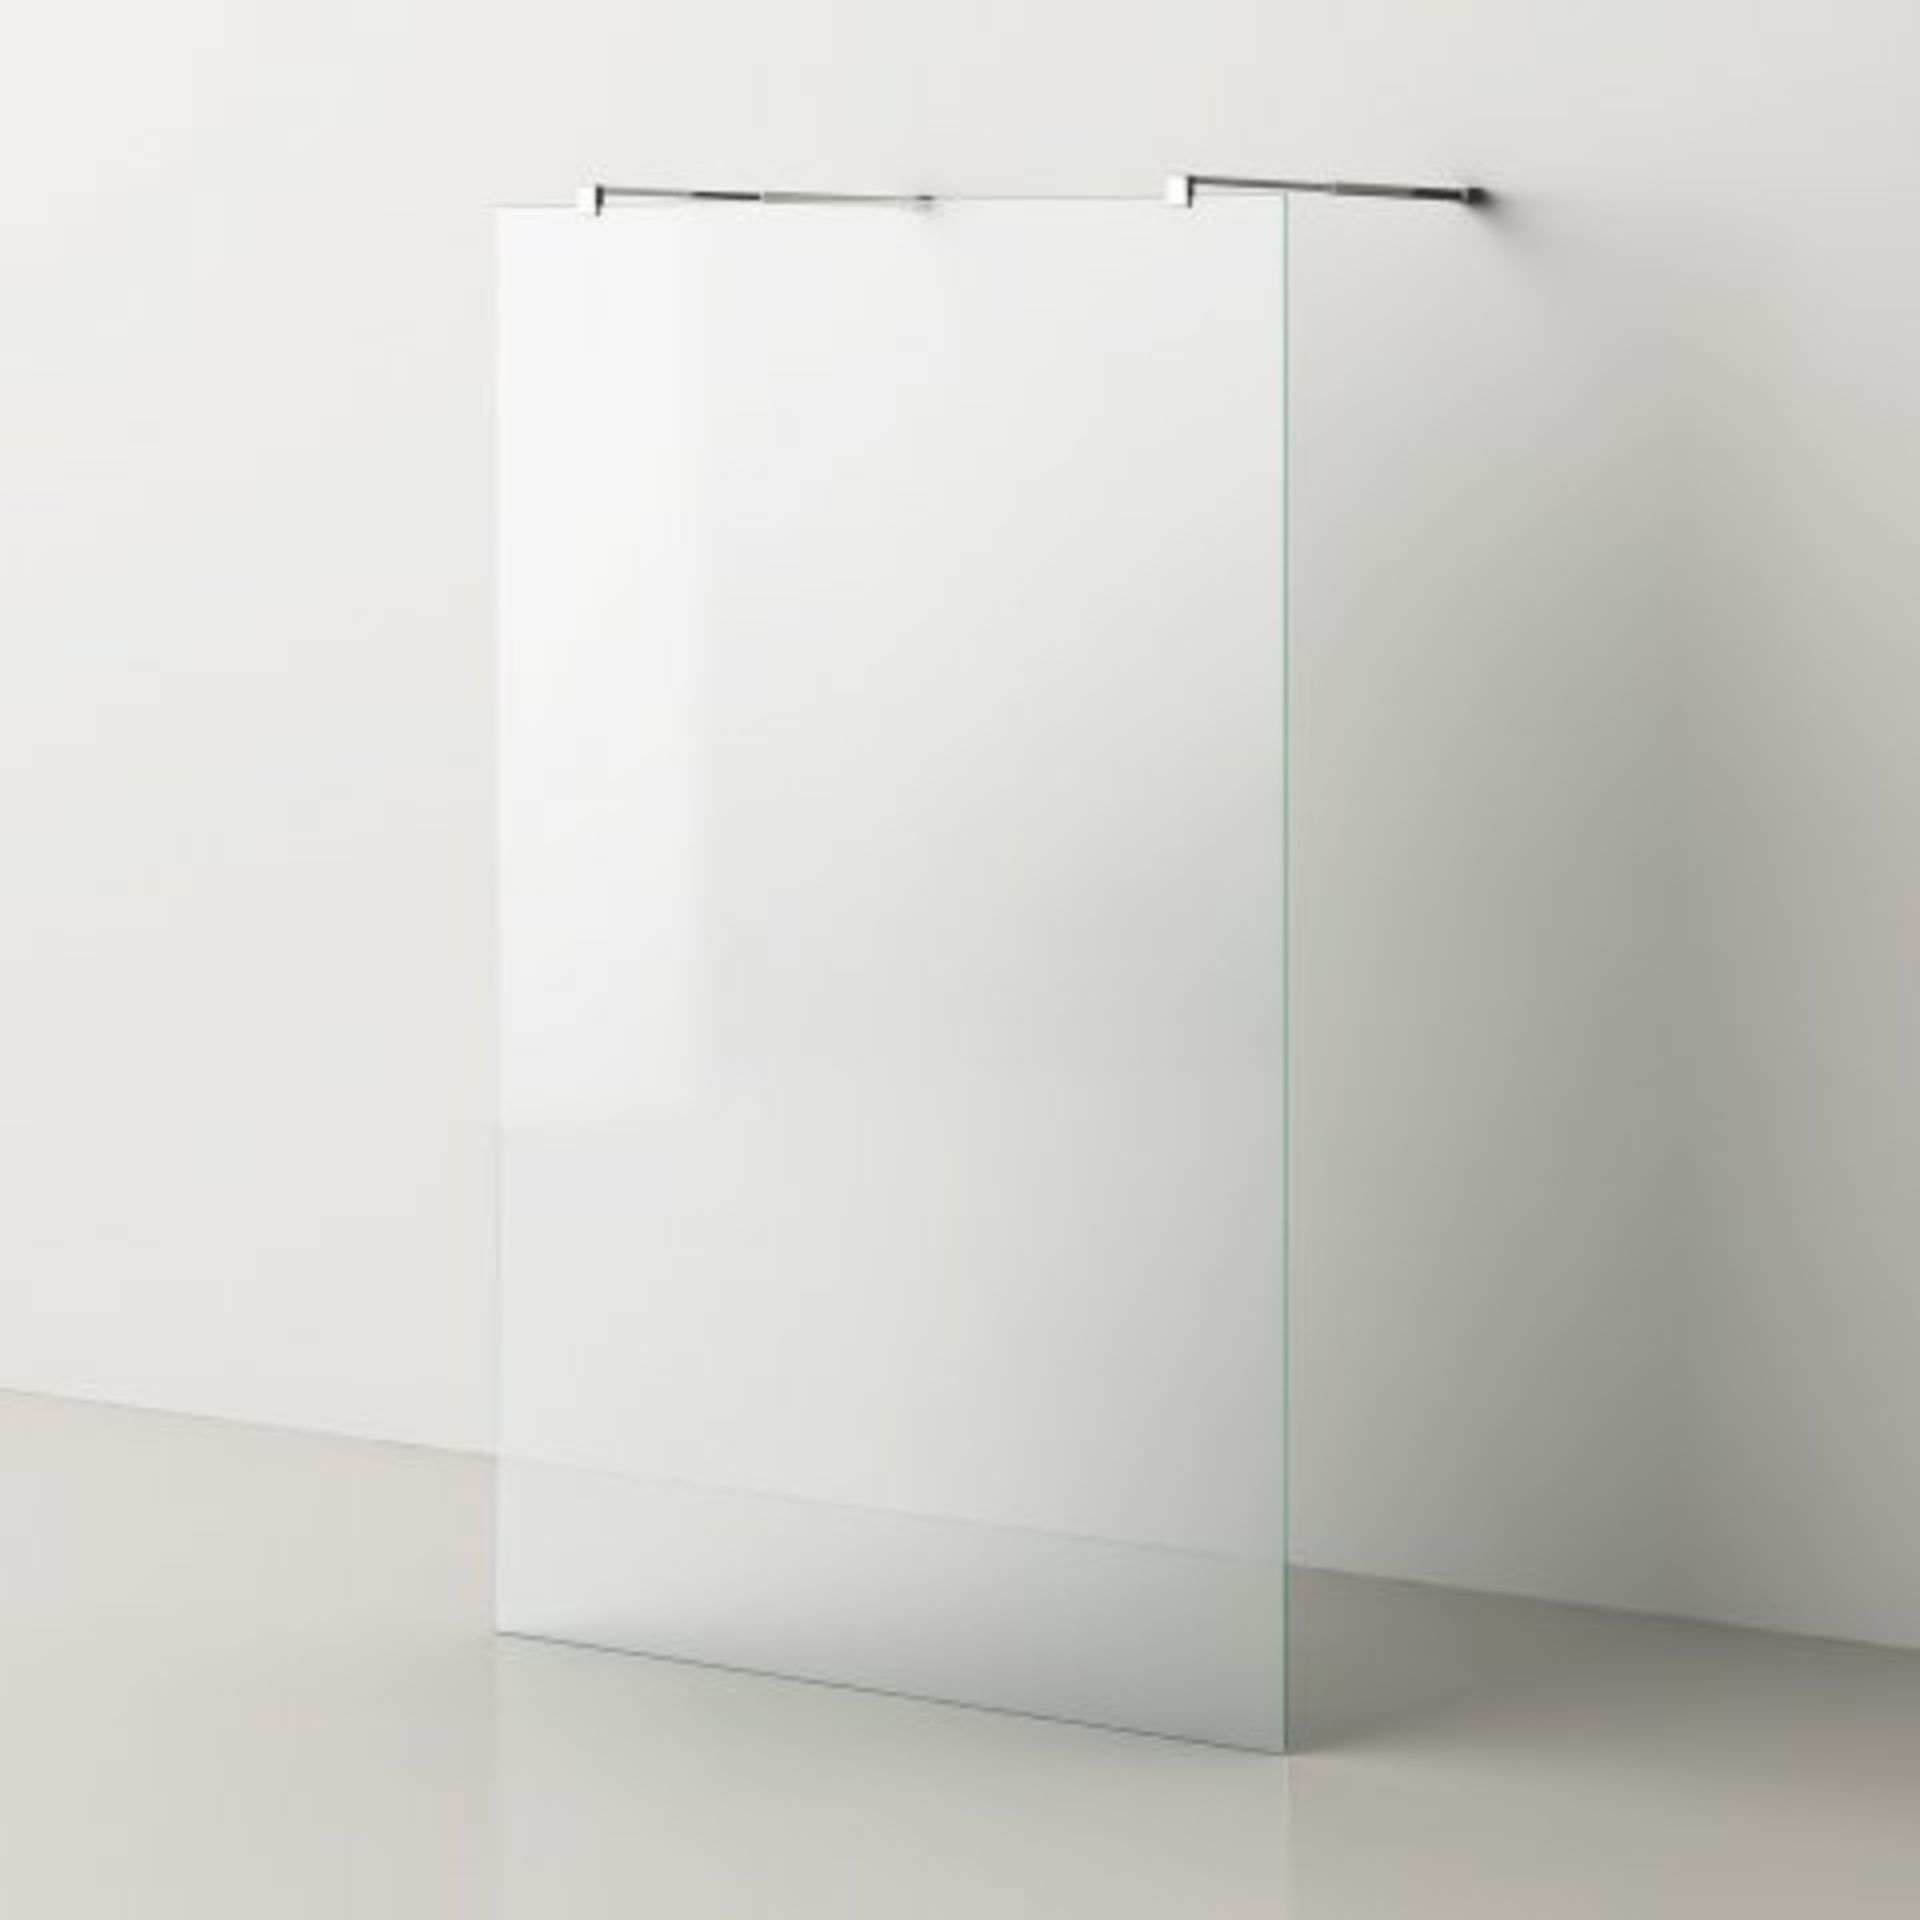 (A29) 1000mm - 8mm - Designer EasyClean Walk Through Panel RRP £499.99 Combining gorgeous modern - Image 3 of 5